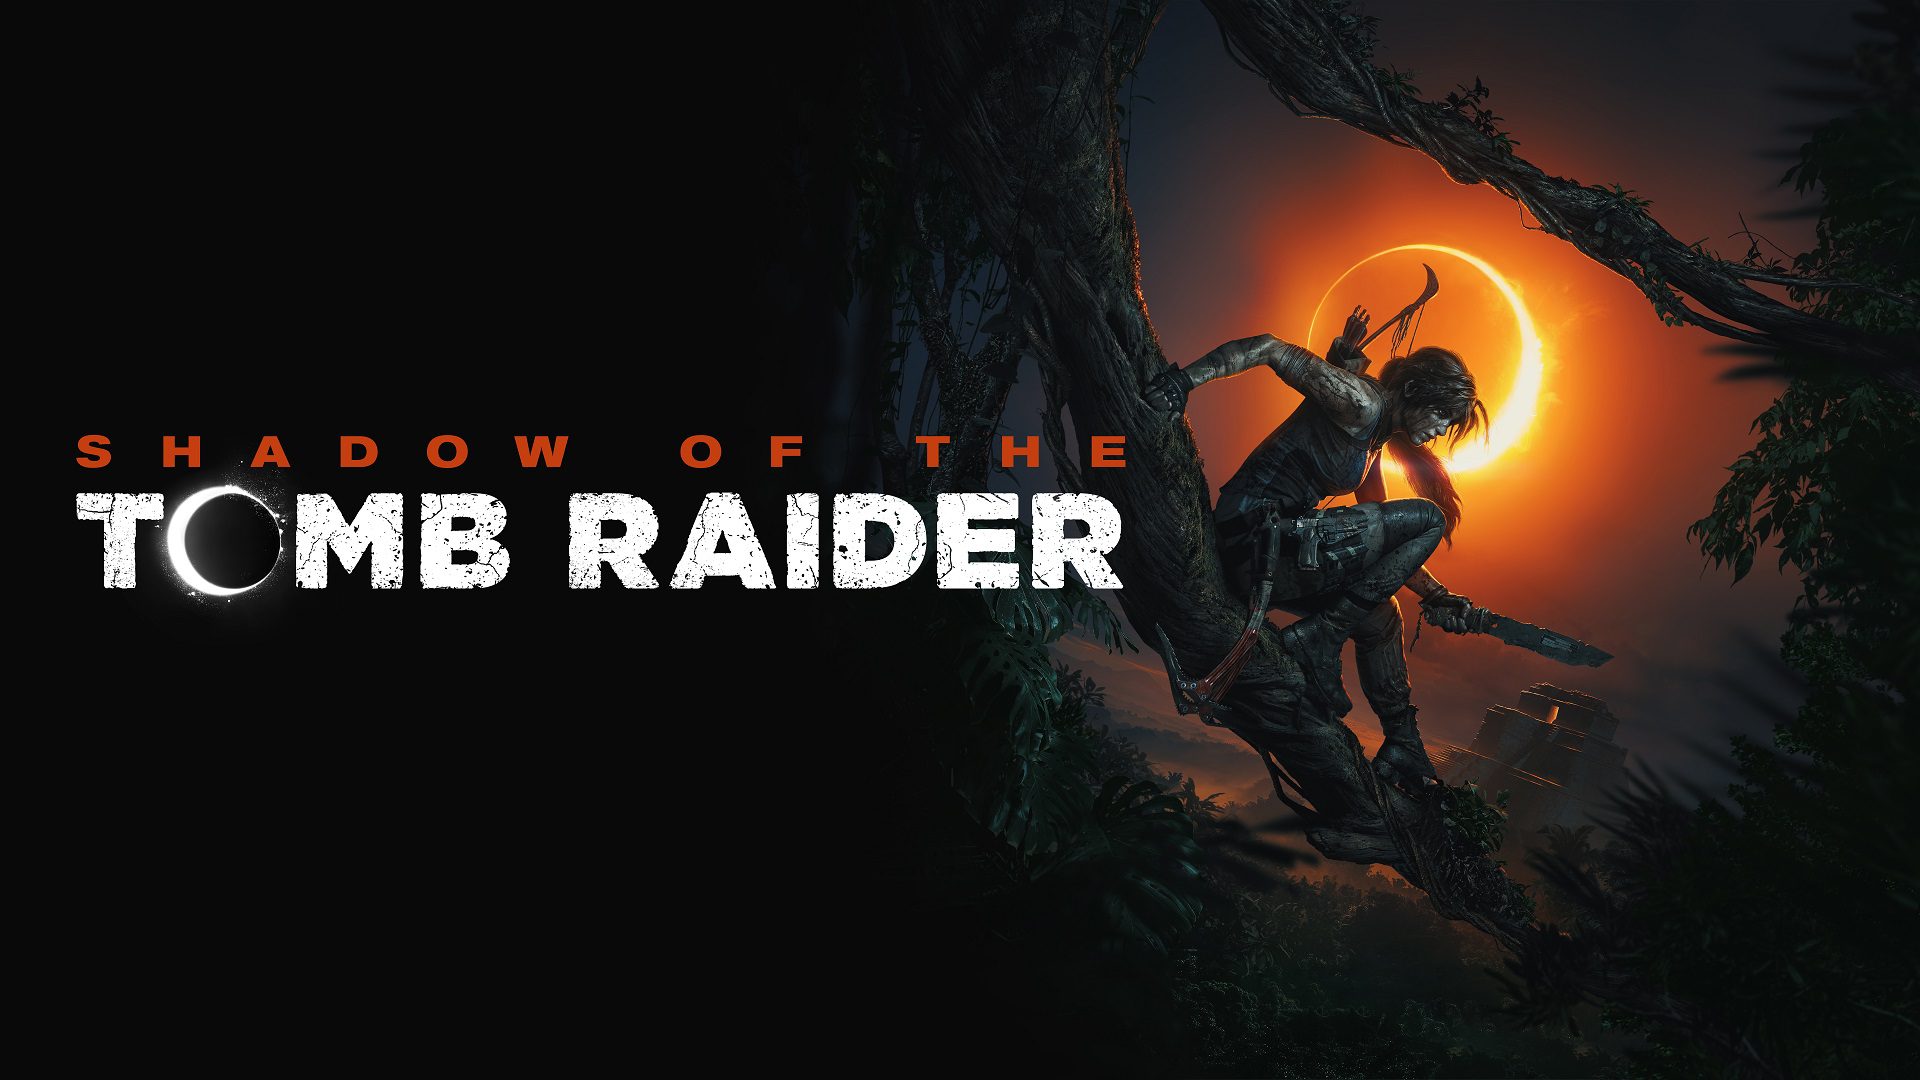 Tomb raider for steam фото 33